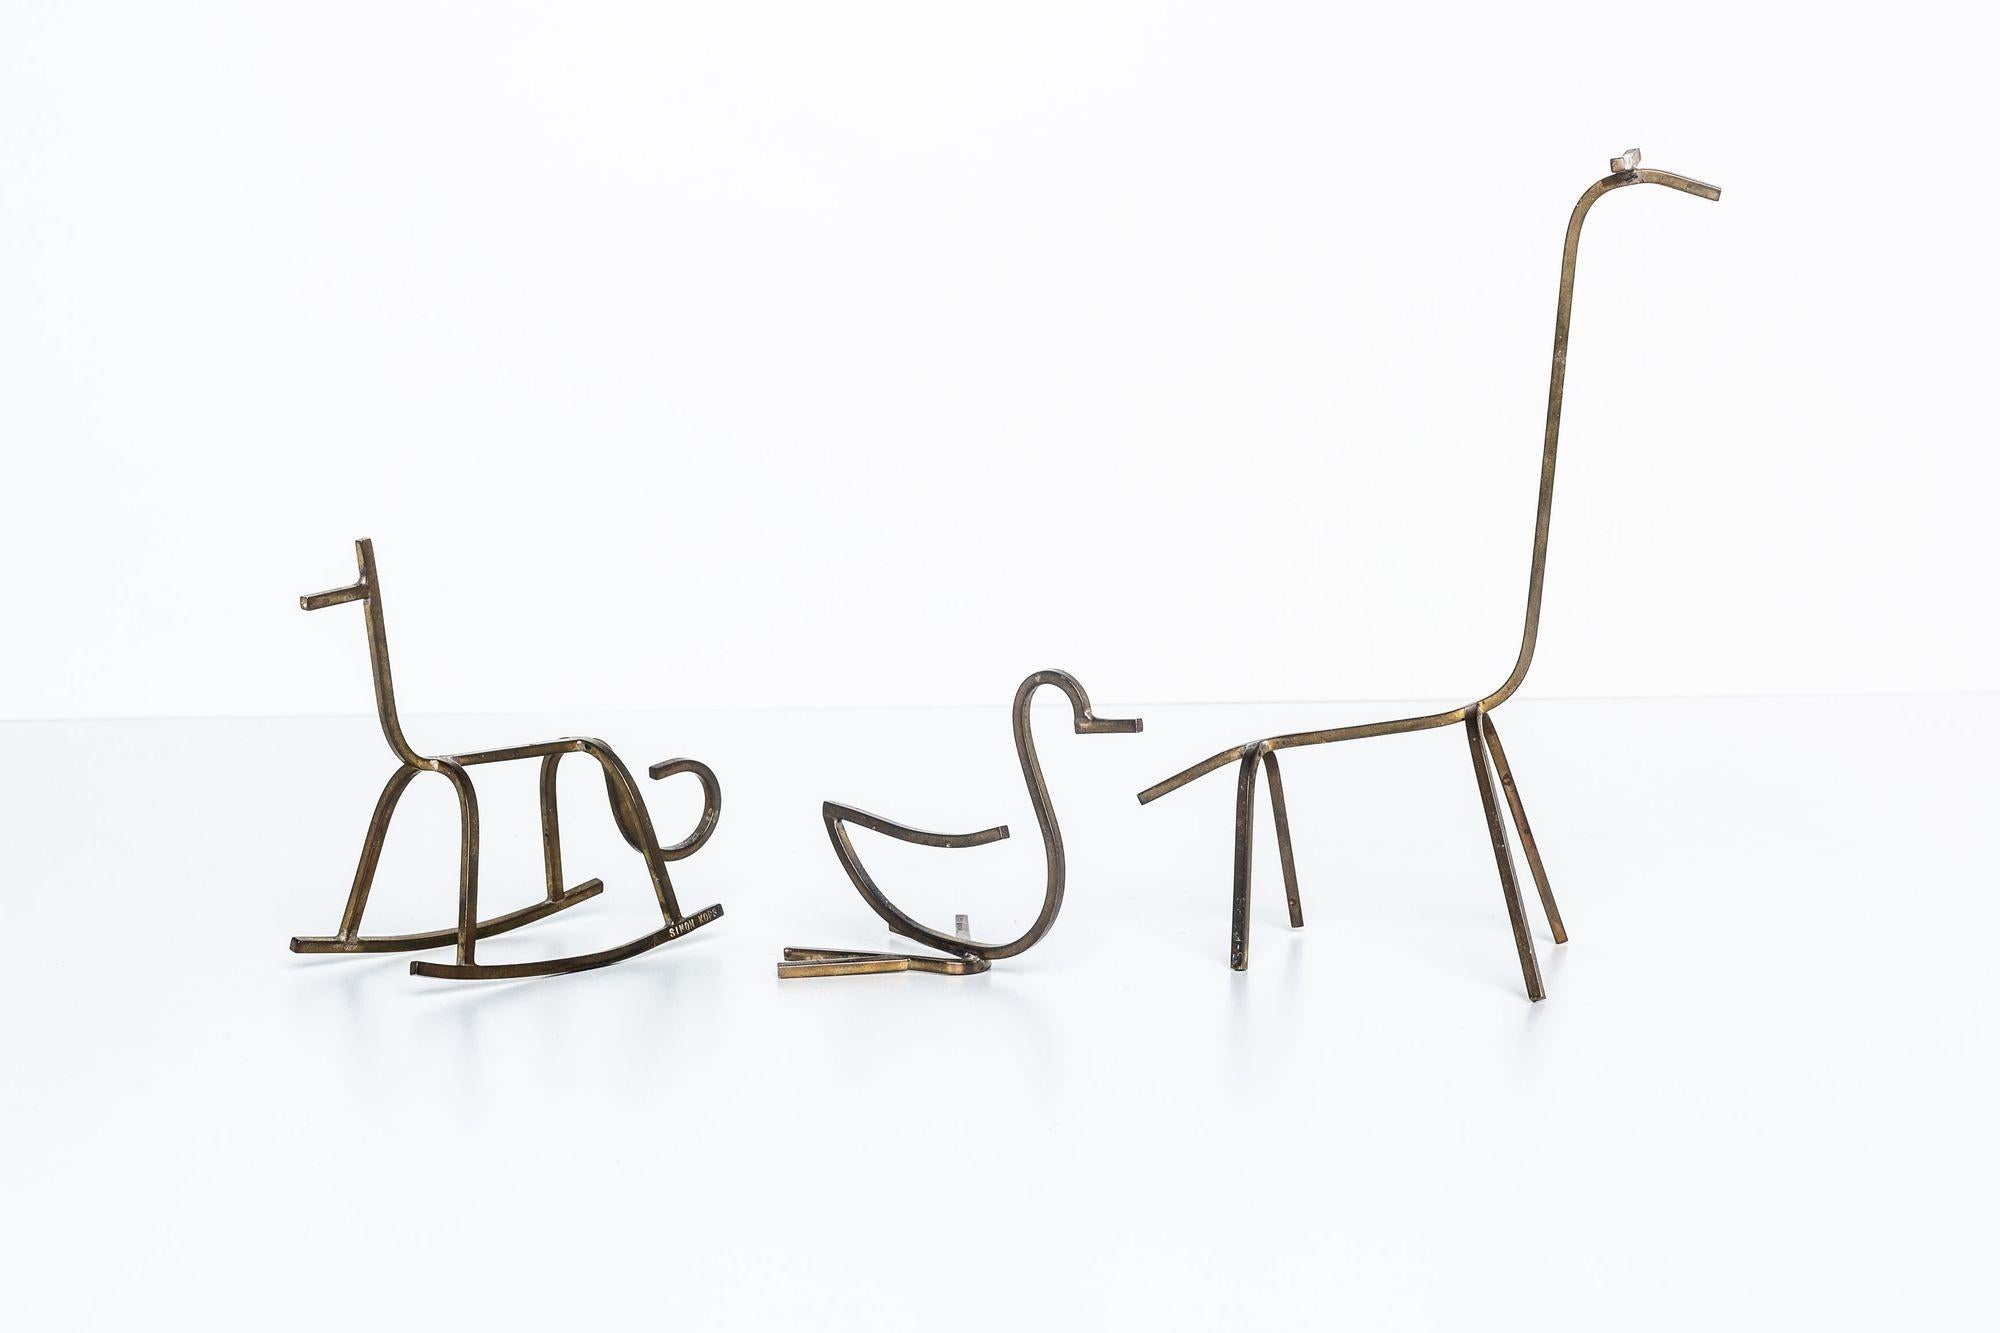 Hand-Crafted Simon Kops set of Brass Minimalist Animal Sculptures For Sale